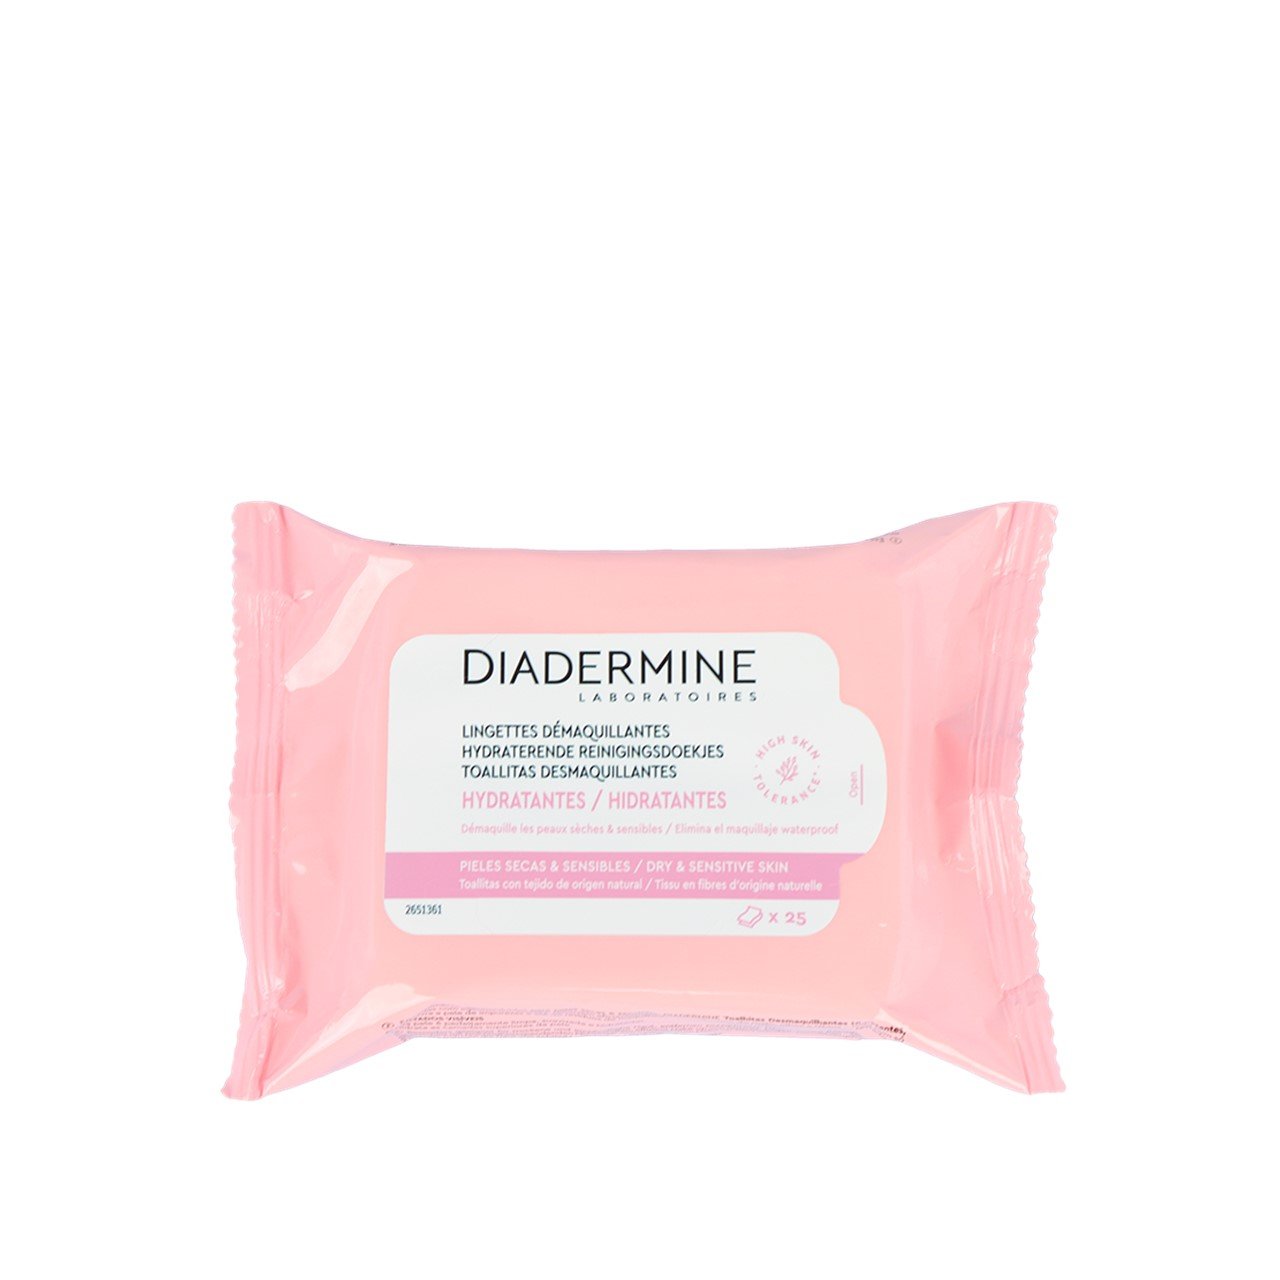 Diadermine Moisturizing Cleansing Wipes for Dry & Sensitive Skin x25